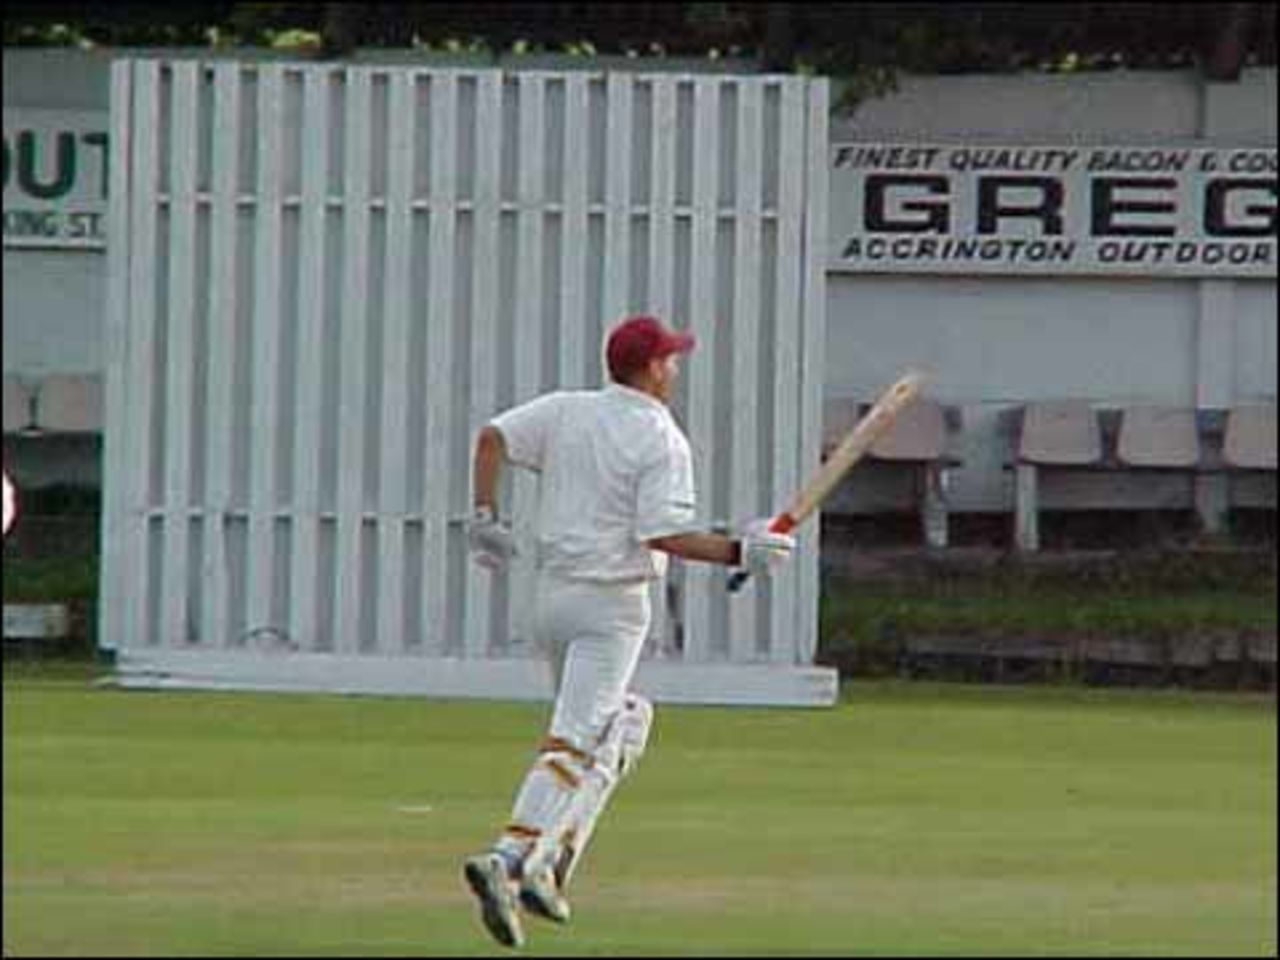 Haslingden batsman Mike Ingham set a new league record for most career runs when he scored his 40th run at Accrington on July 20th.